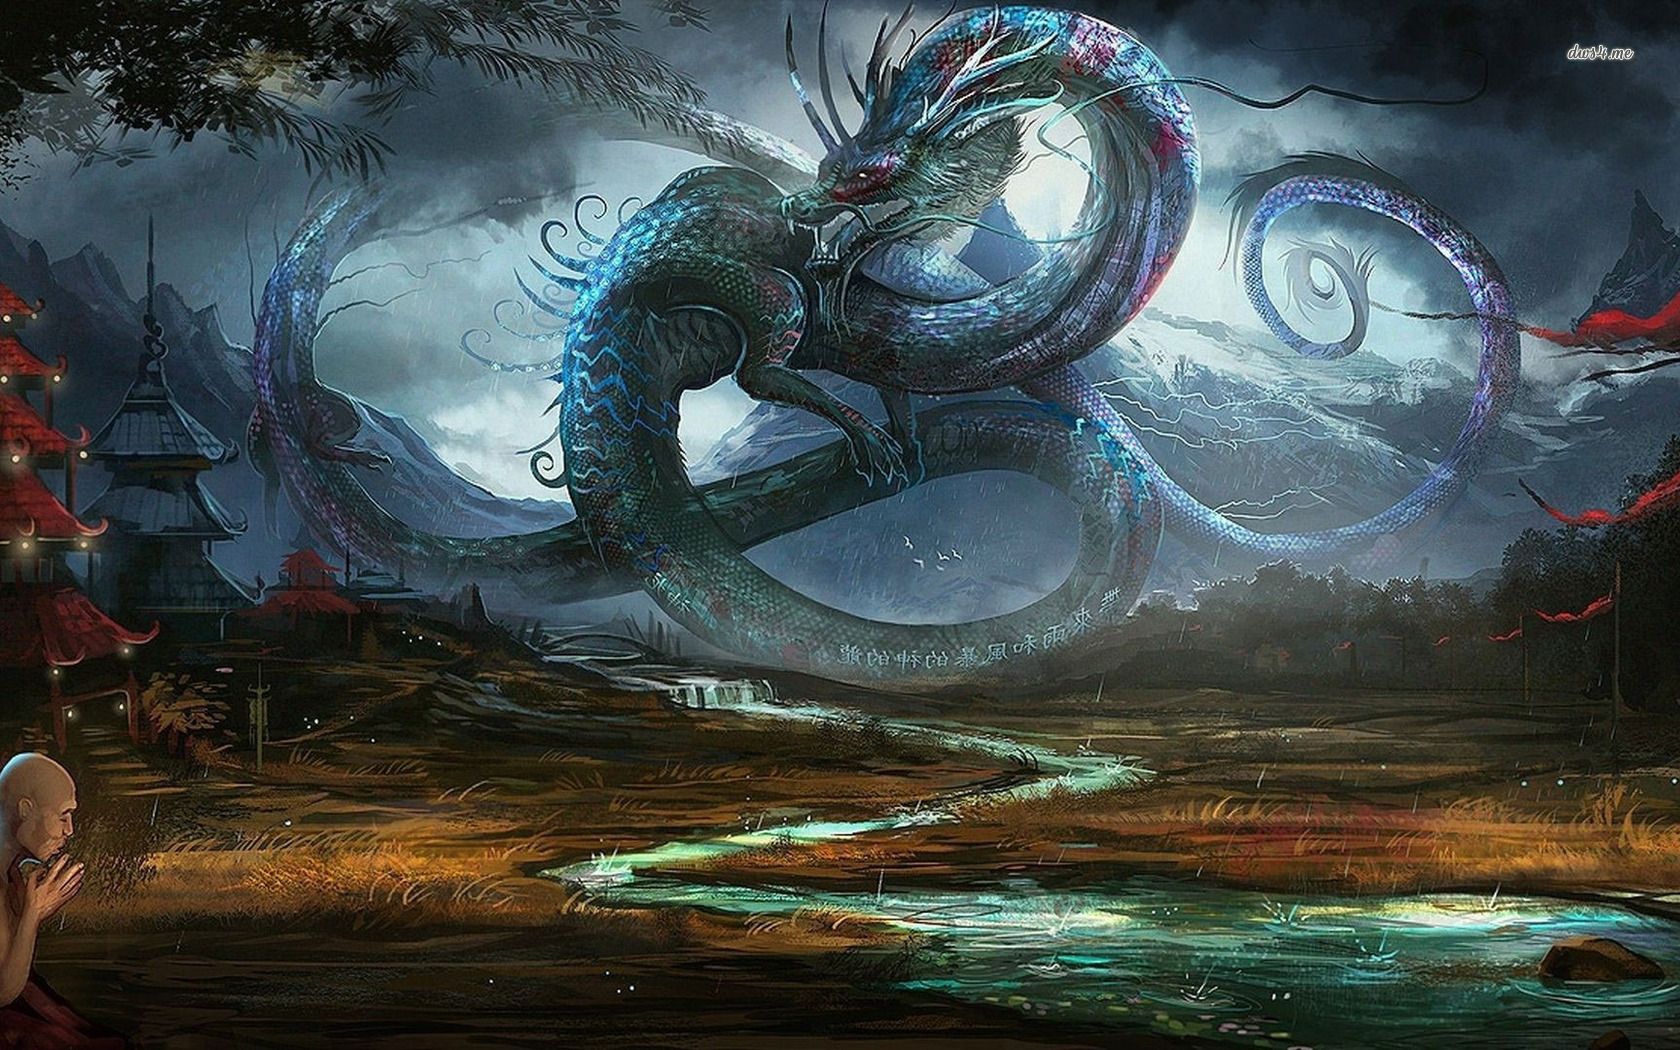 Dragon in ancient Chinese village wallpaper wallpaper